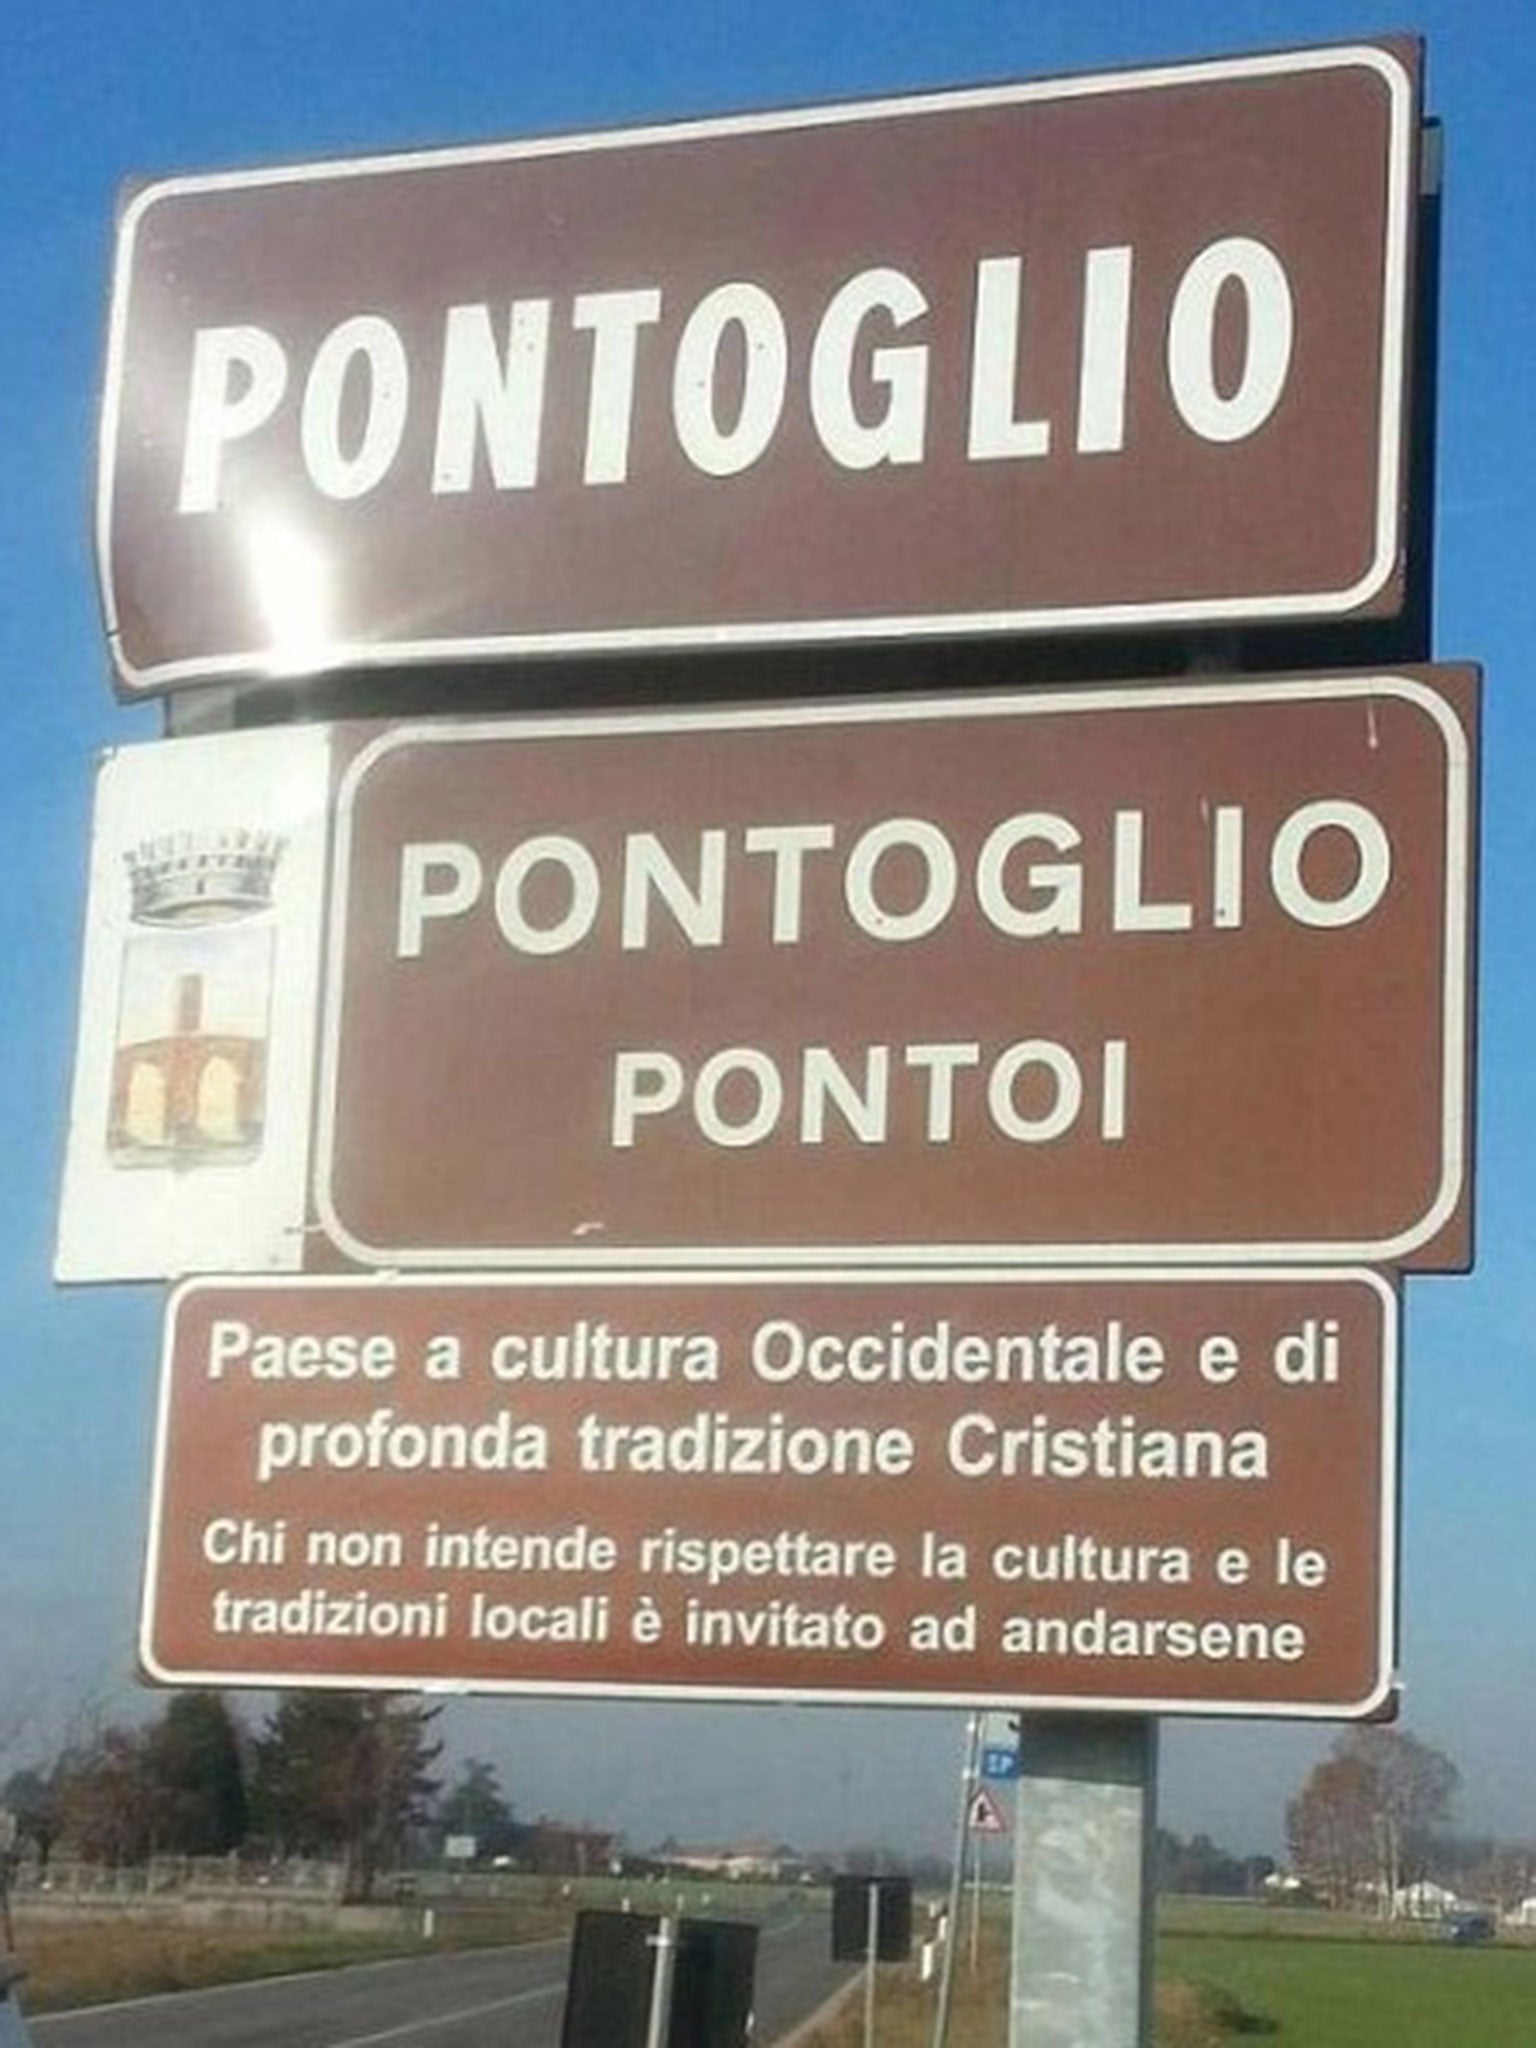 This sign has been erected at the entrance to Pontoglio in Lombard, Italy